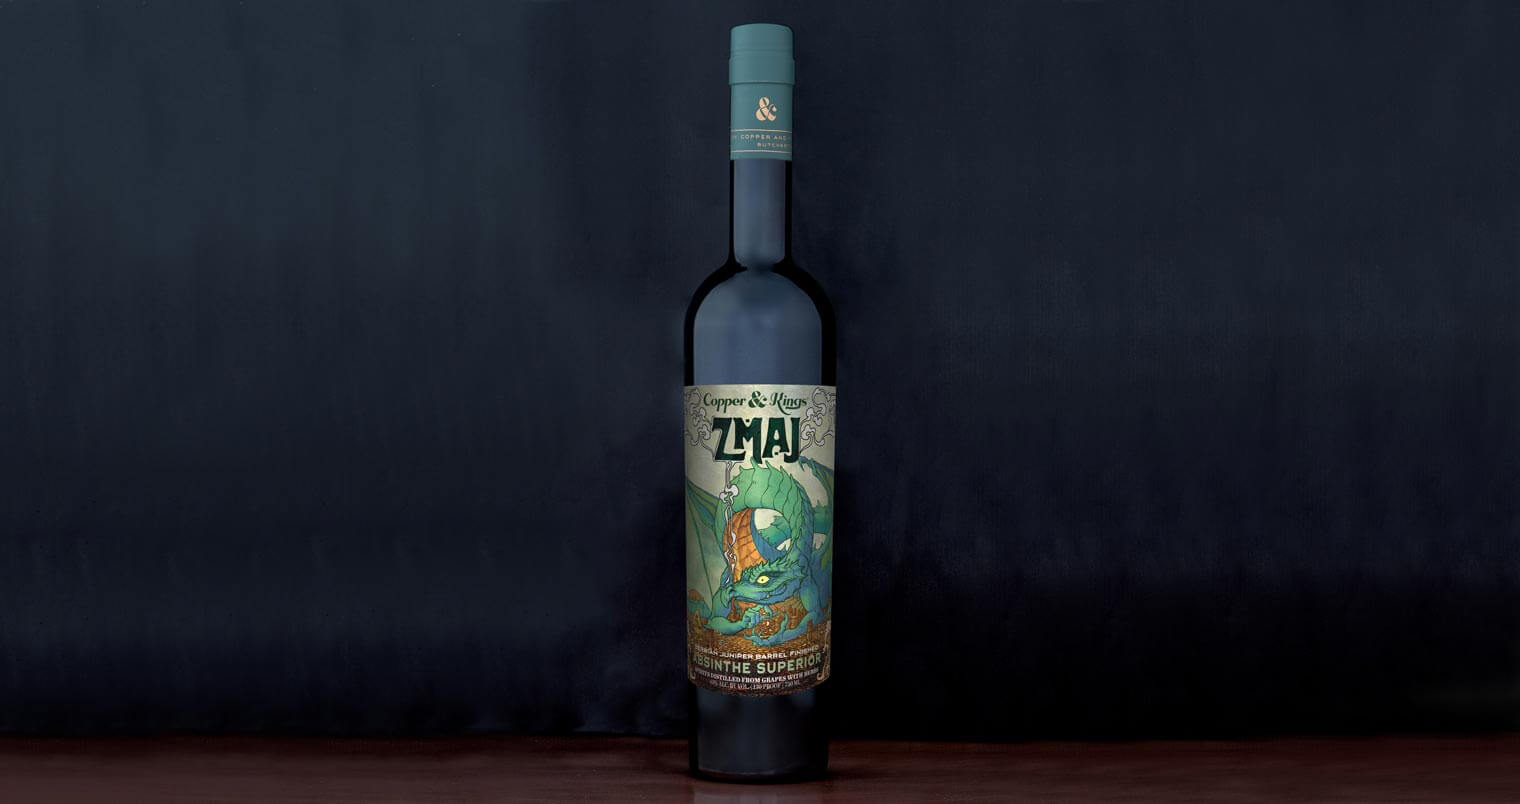 Copper & Kings Launches "Zmaj" Serbian Absinthe, featured image